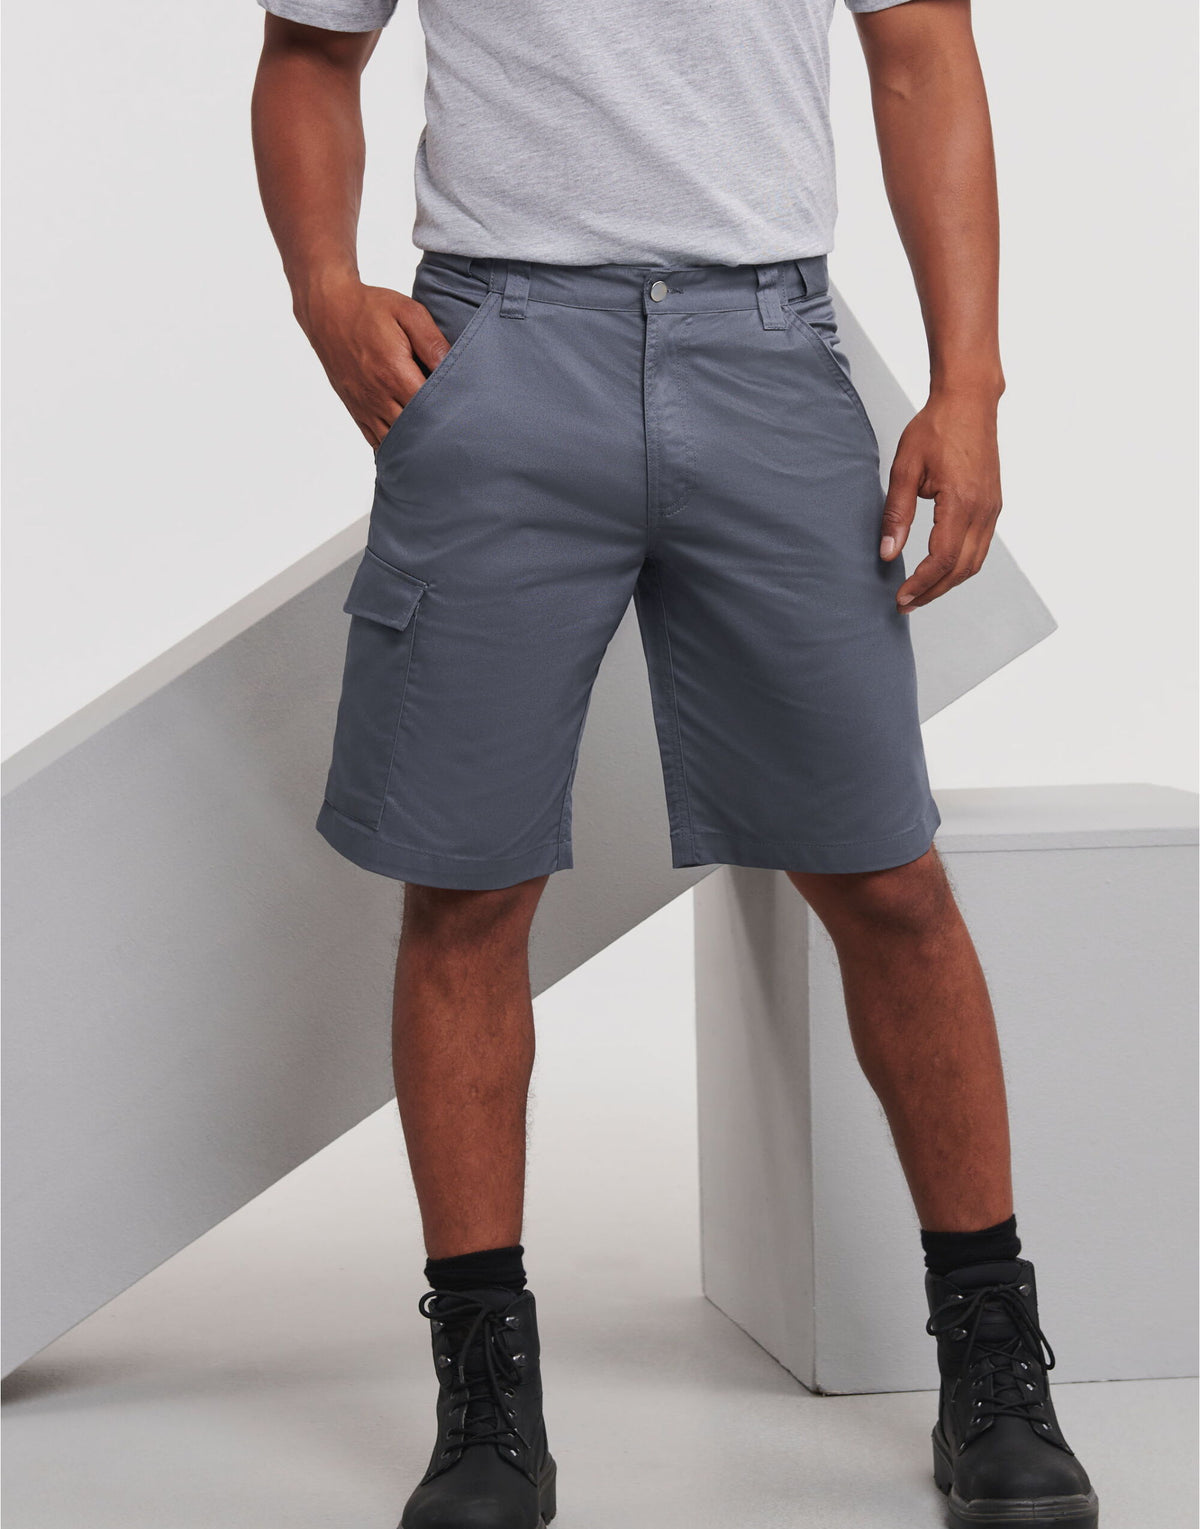 Russell Polycotton Twill Shorts